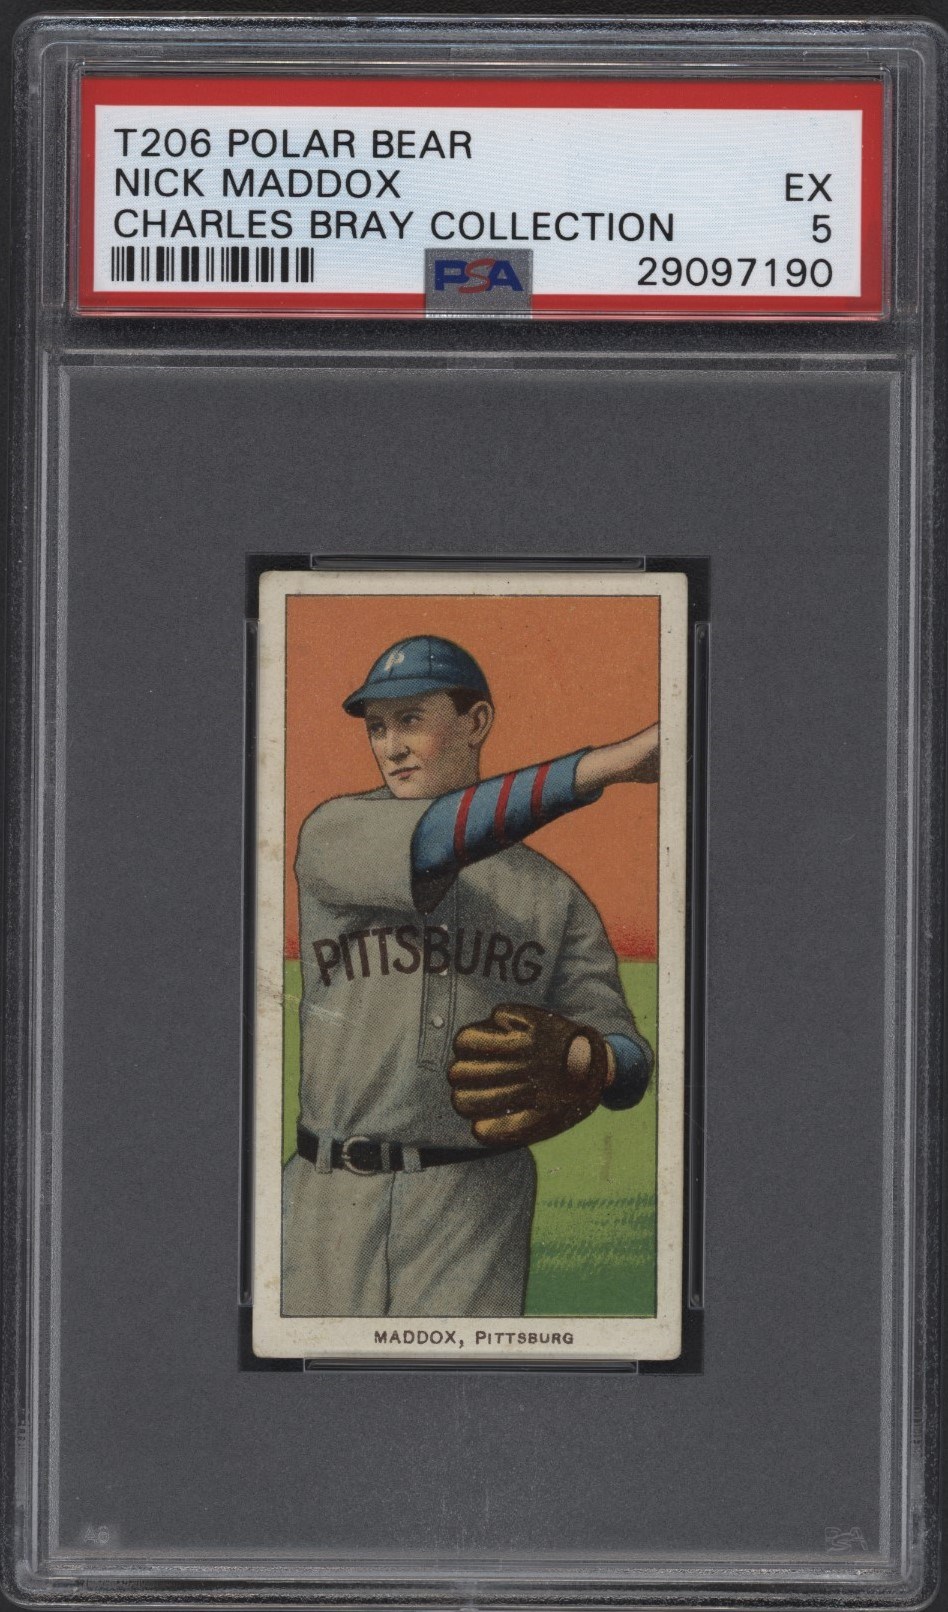 Baseball and Trading Cards - T206 Polar Bear Nick Maddox PSA EX 5 From the Charles Bray Collection